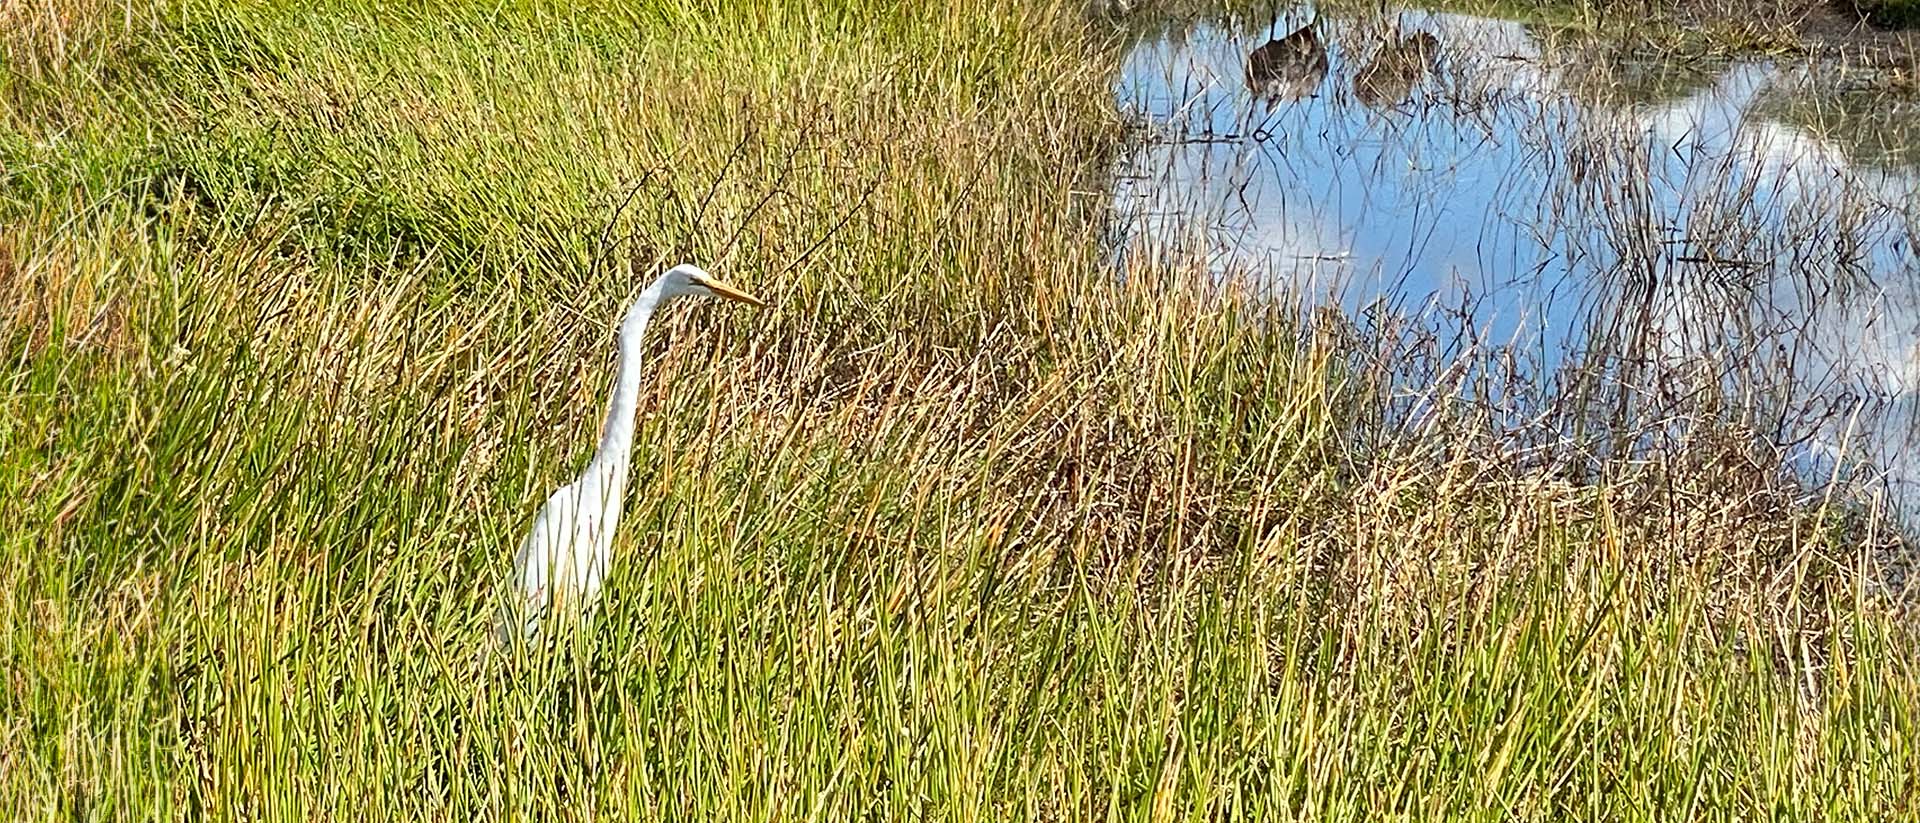 white egret hunting amongst the grasses at the edge of a pond